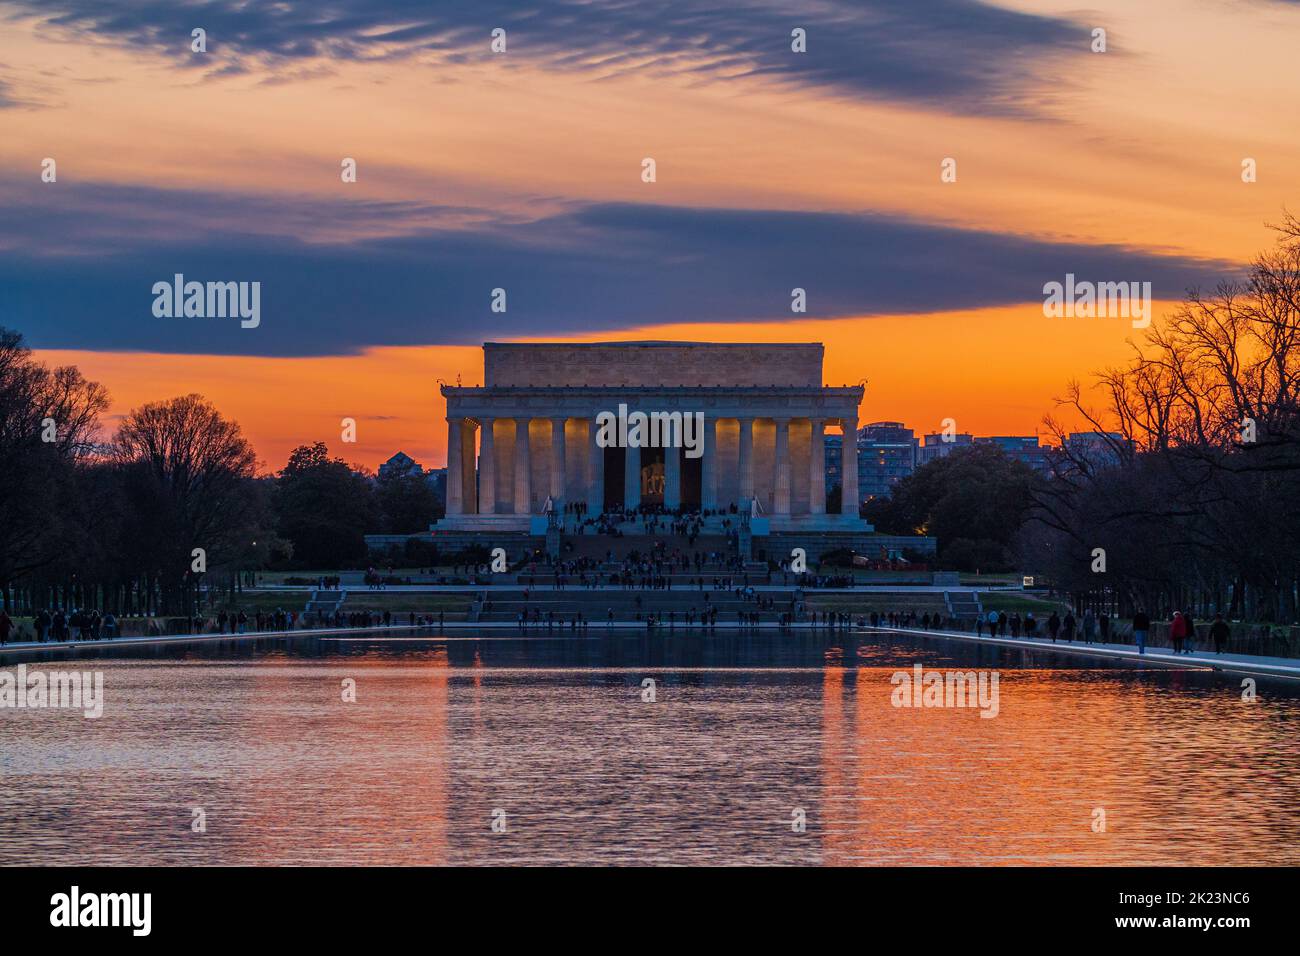 Tourists at the Lincoln Memorial in Washington D.C. Stock Photo